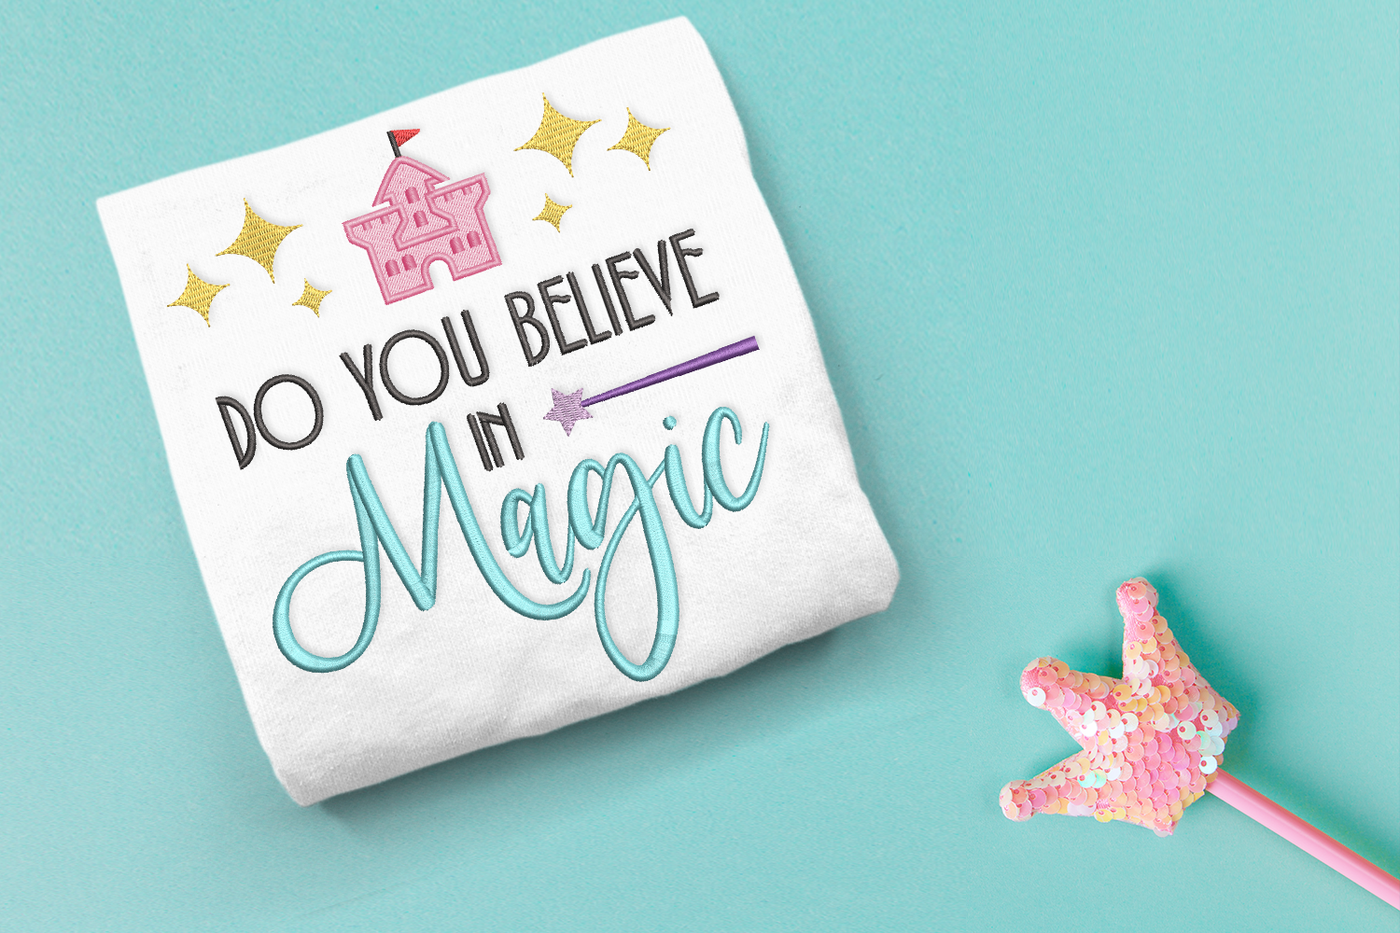 Do you believe in magic embroidery design with a castle and fairy wand